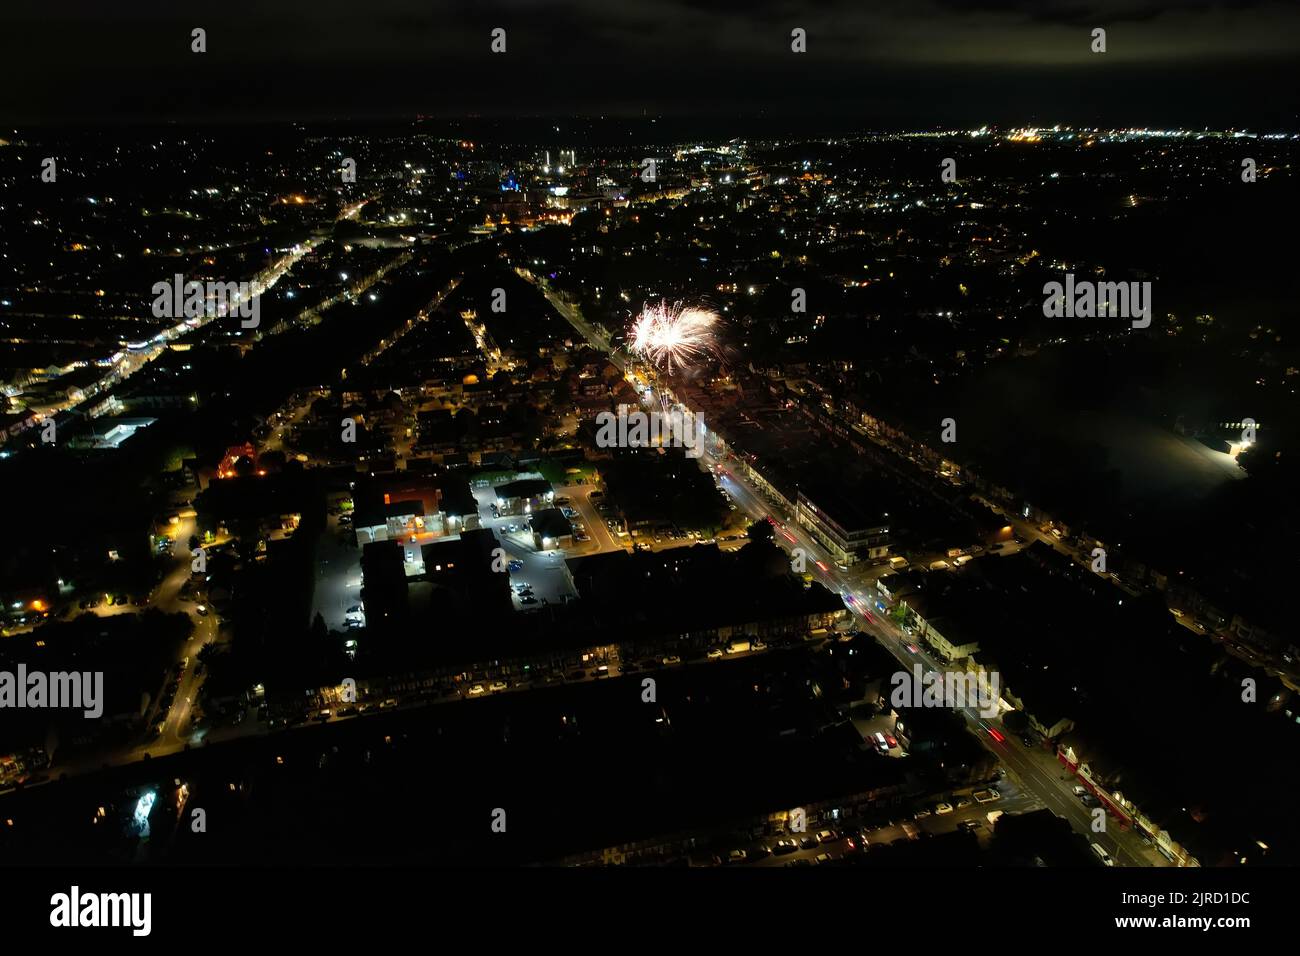 Aerial View Footage of British Houses, Illuminated Roads with Traffic on Motorways at England. High Angle Footage of British British City at Night. Stock Photo